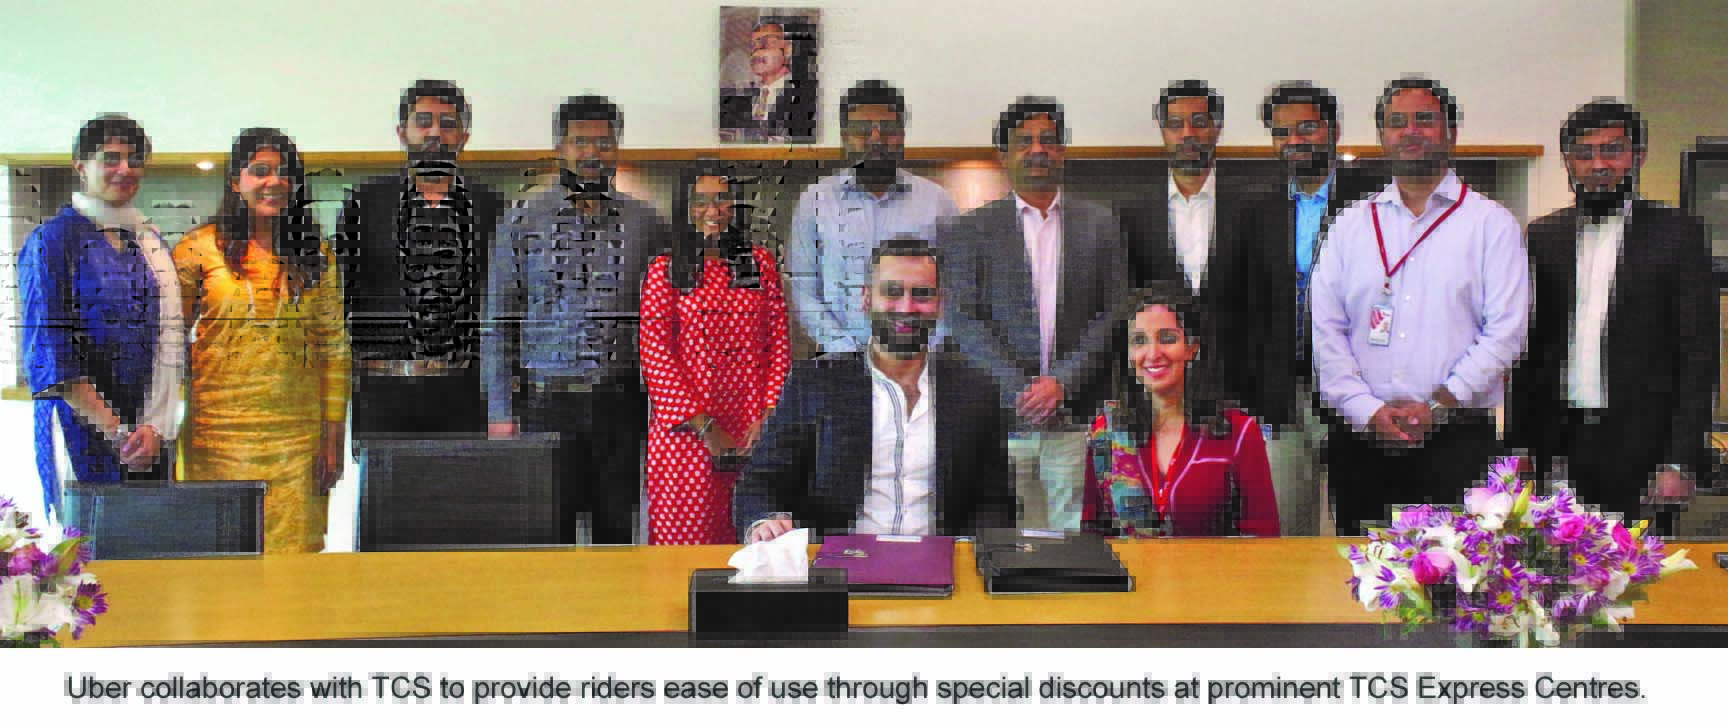 Uber partners with TCS: Providing Convenience and Ease for Riders